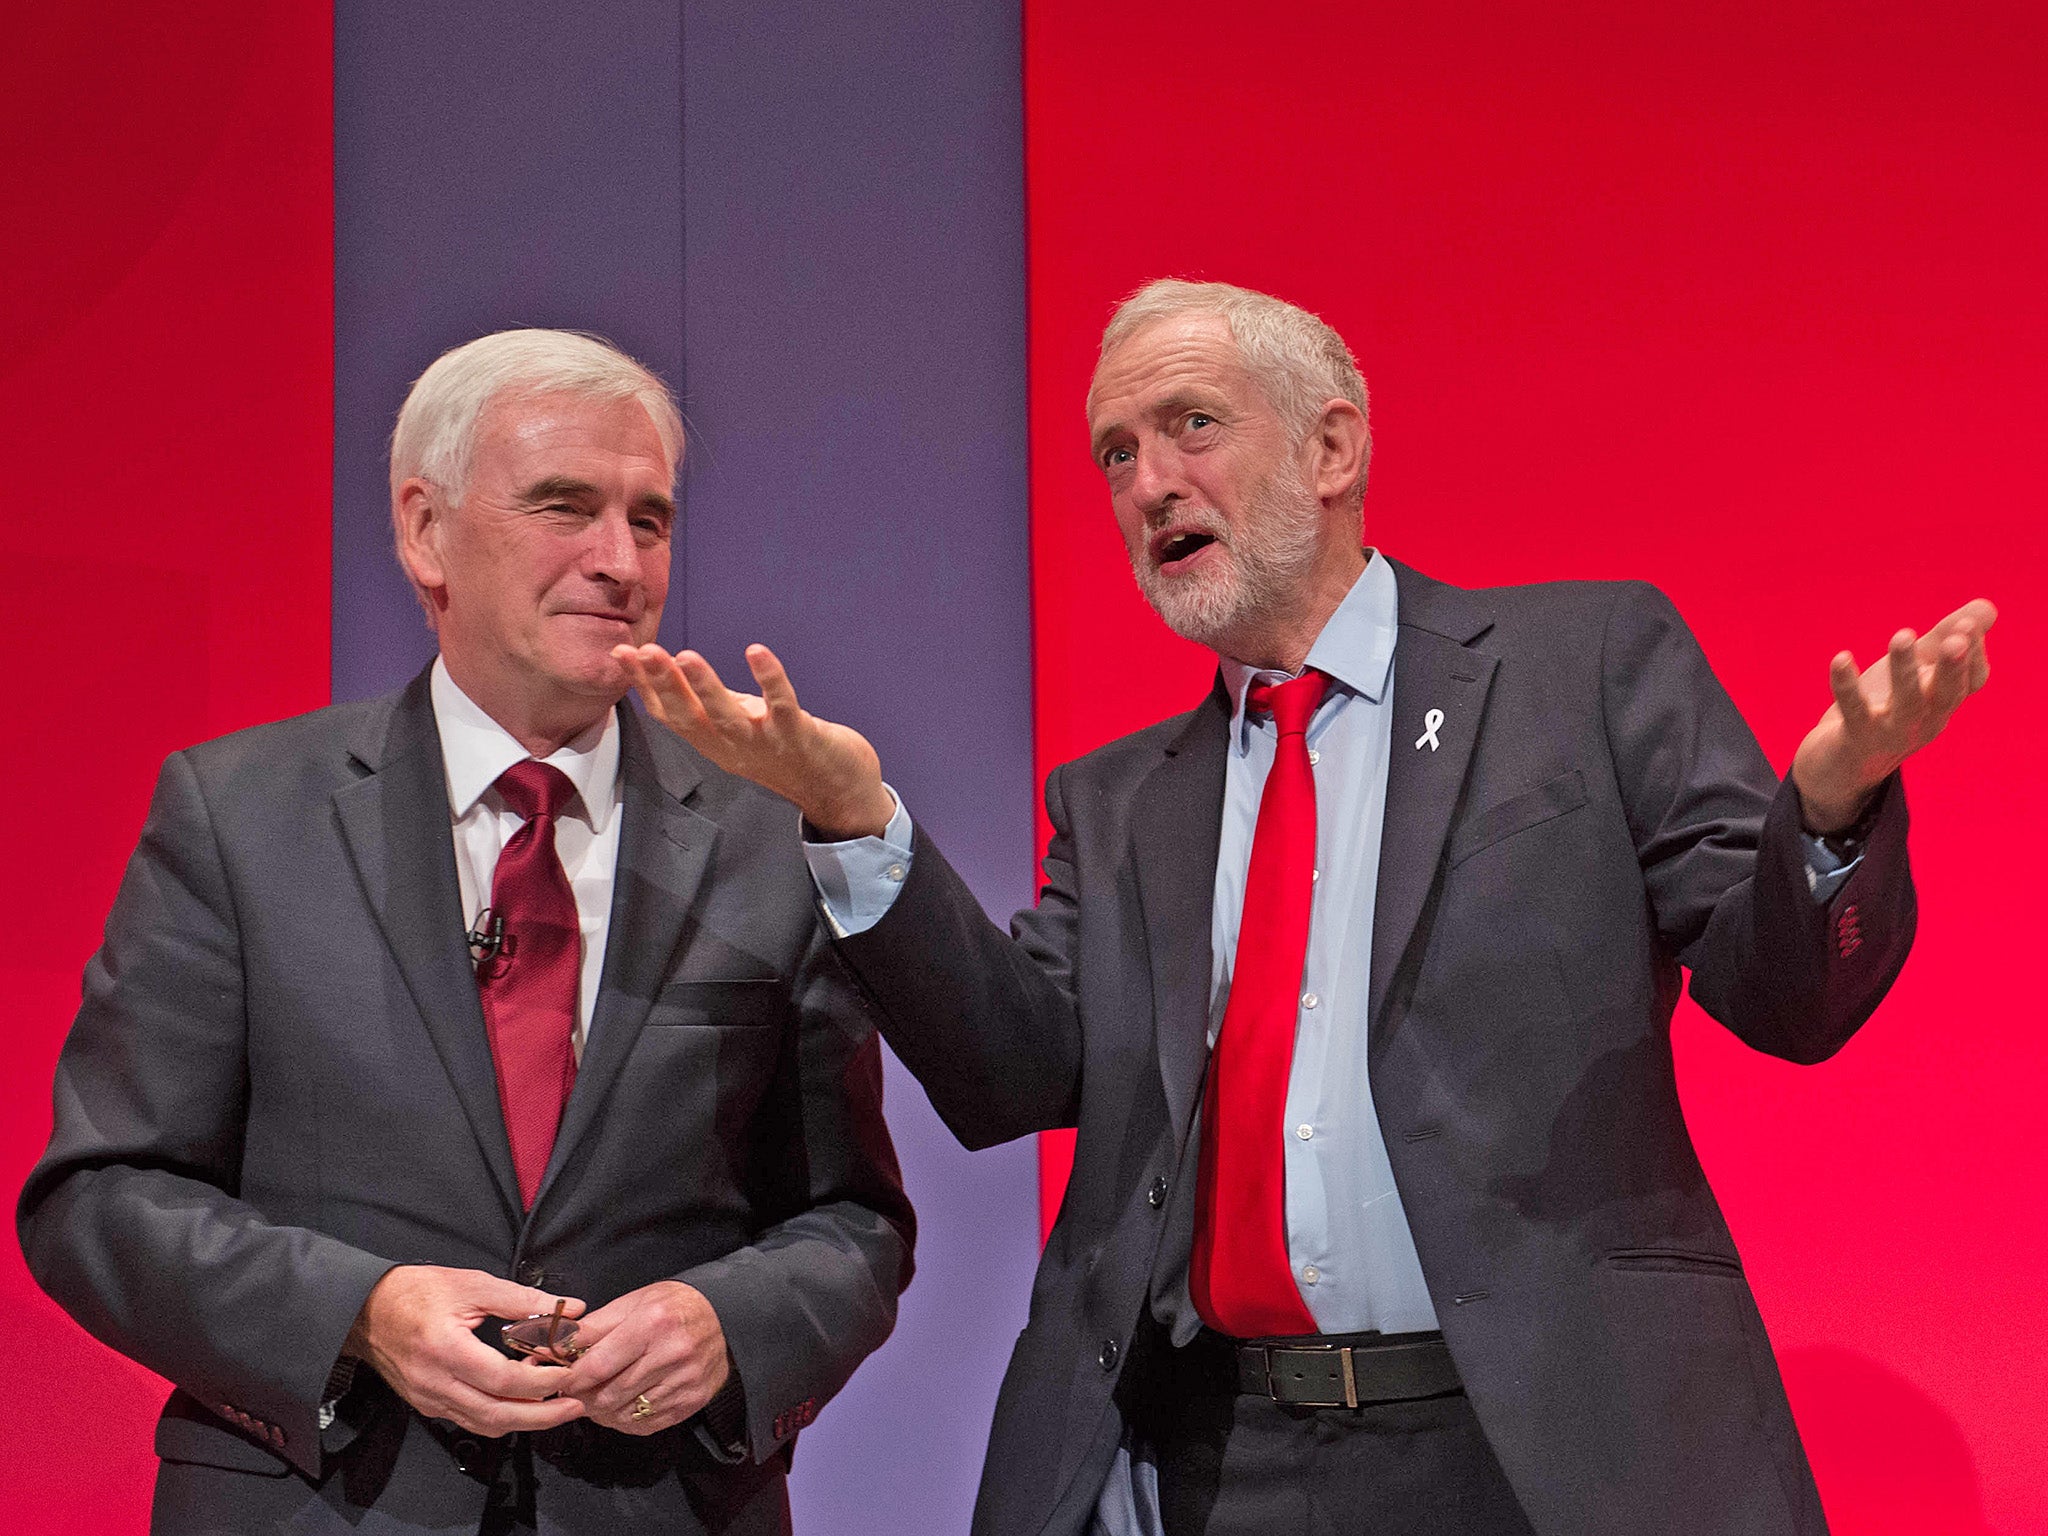 ‘People now understand what Jeremy Corbyn is as an individual,’ said the Shadow Chancellor